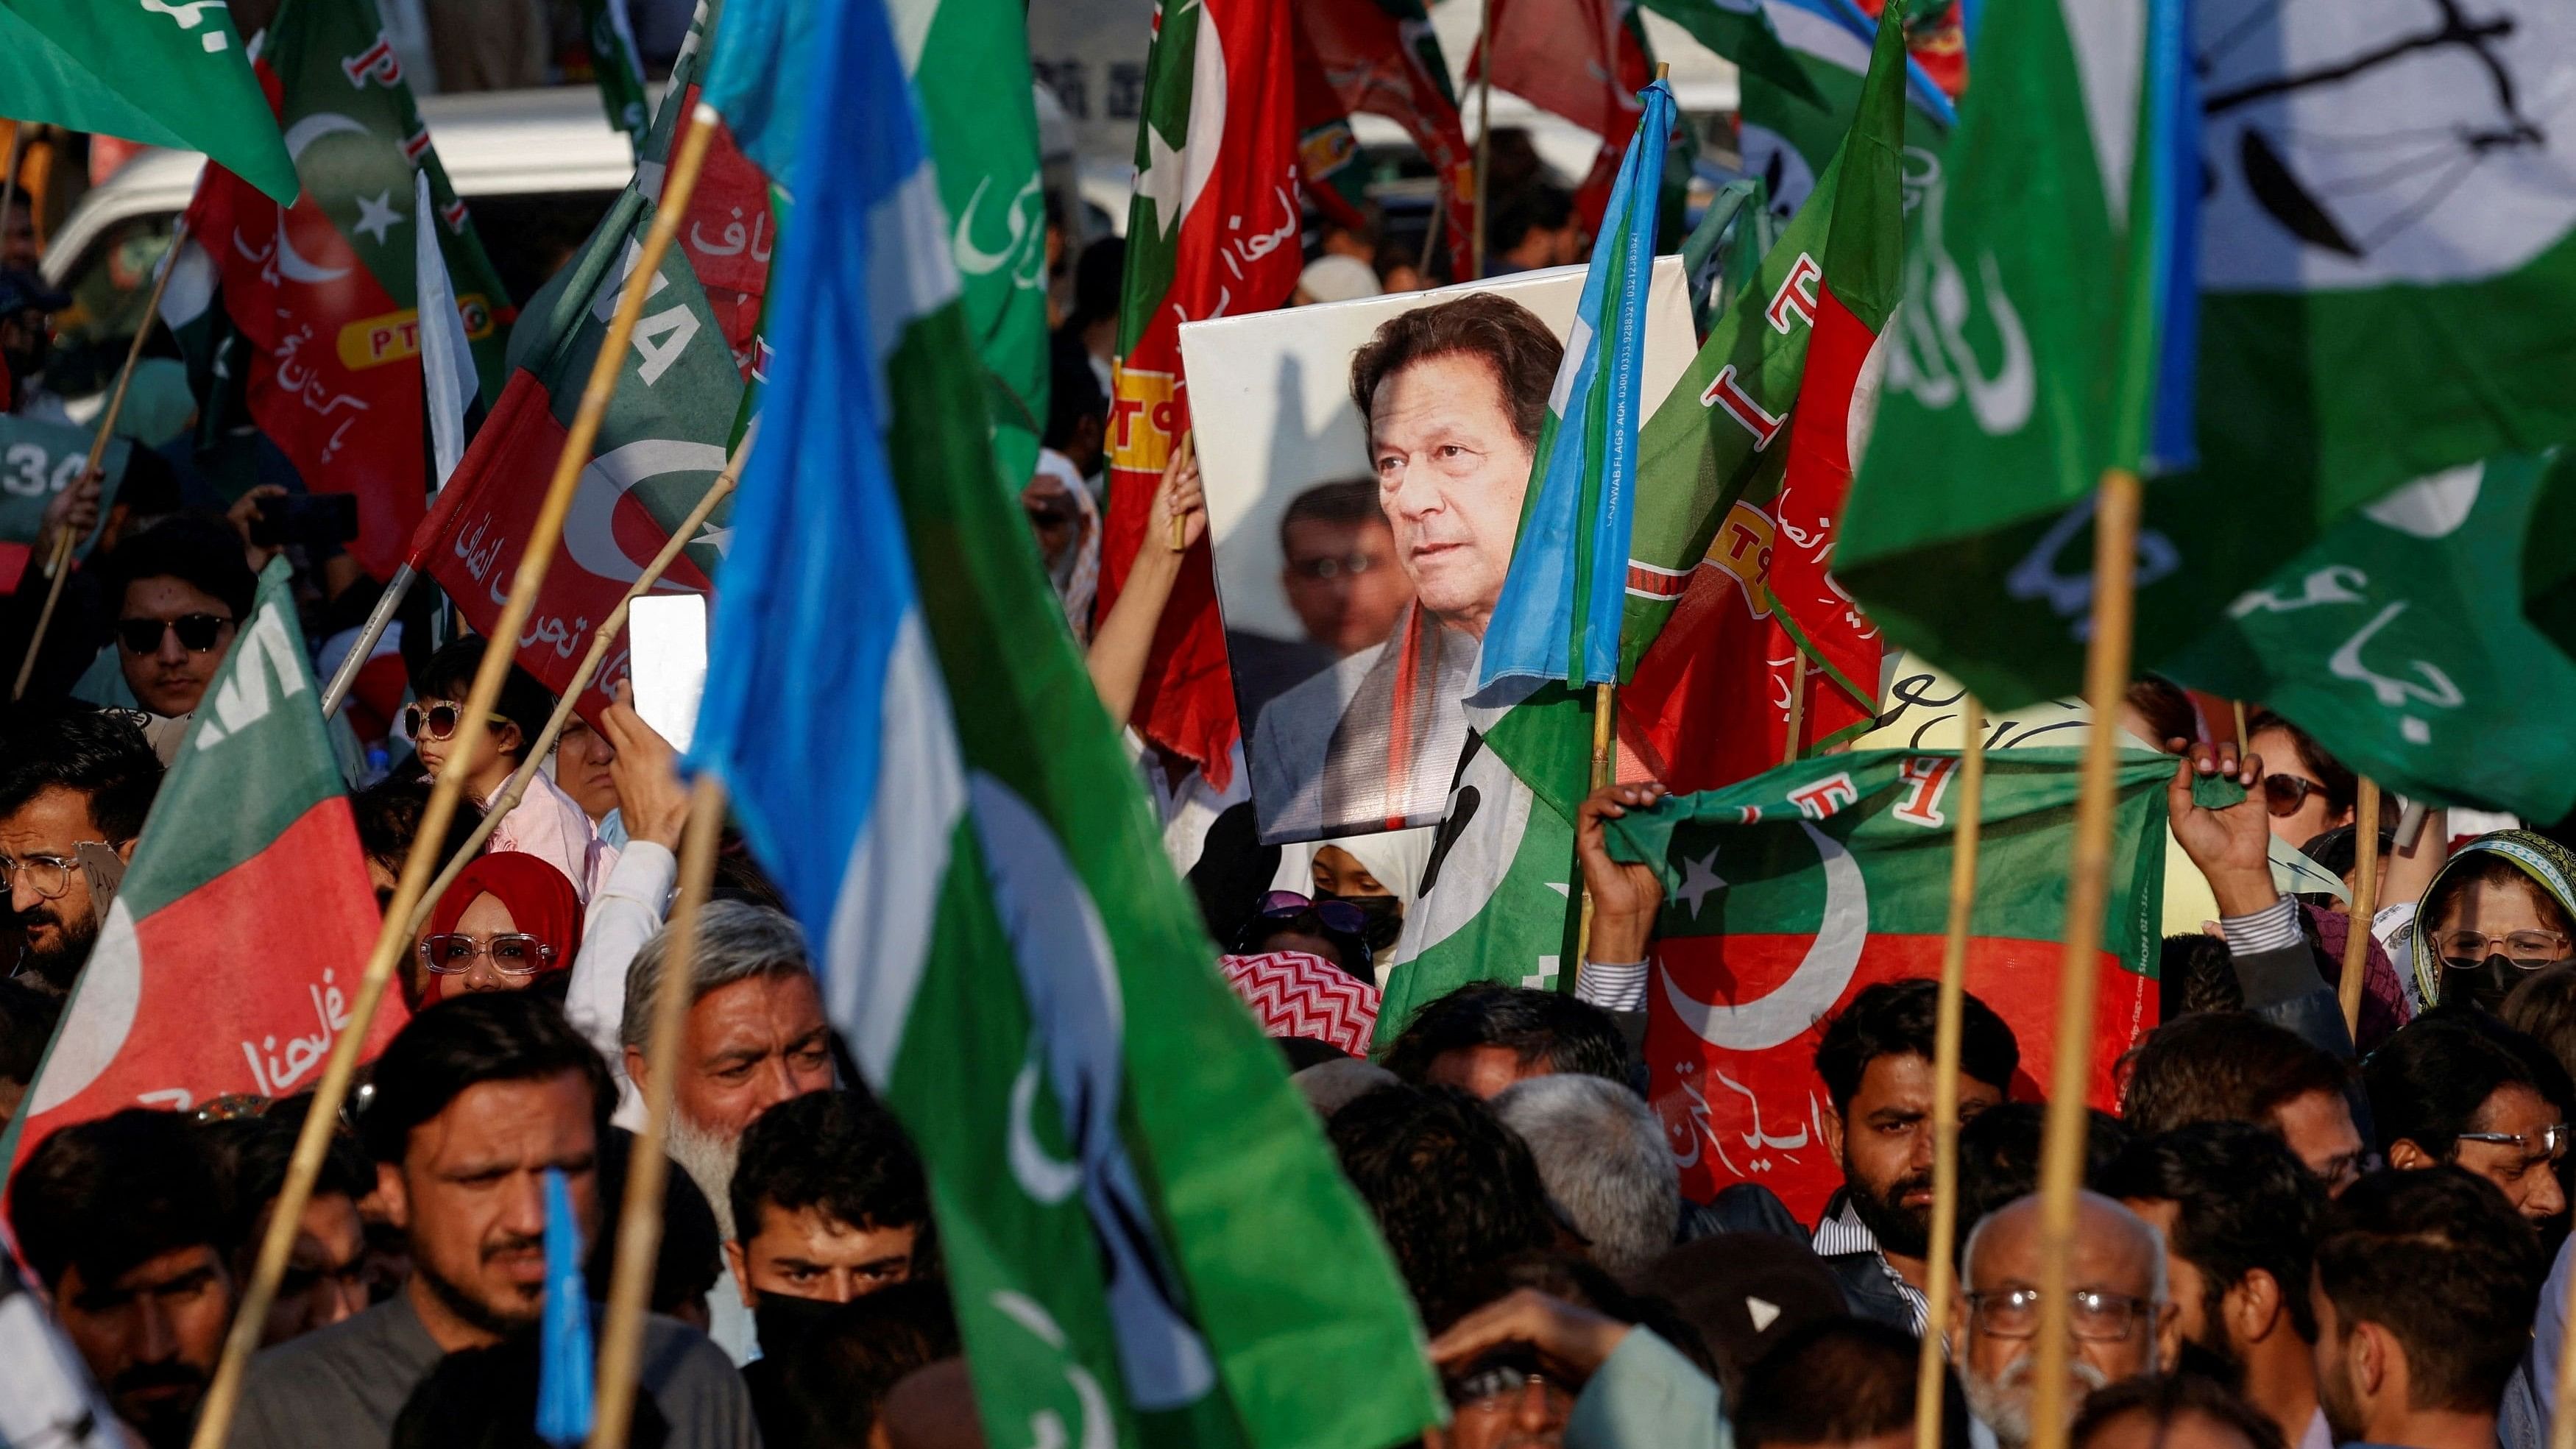 <div class="paragraphs"><p>Image showing supporters of jailed former prime minister of Pakistan Imran Khan, in Pakistan.</p></div>